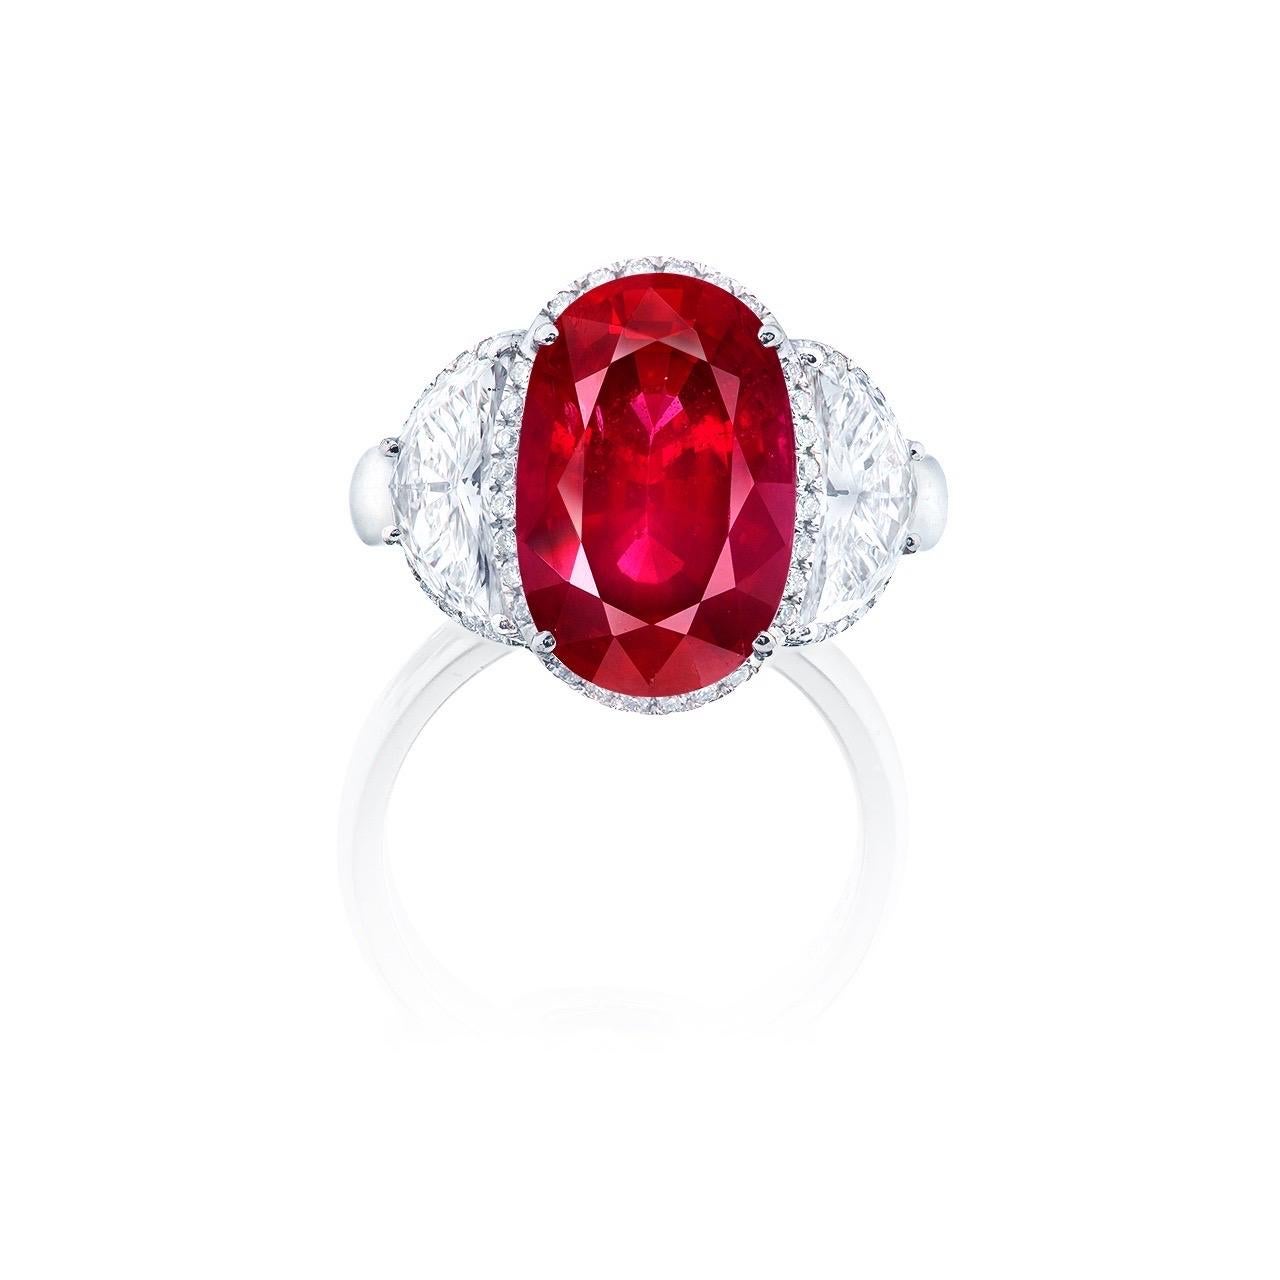 From Emilio Jewelry, a well known and respected wholesaler/dealer located on New York’s iconic Fifth Avenue, 

Main Stone: 7.60 carats Red OVAL